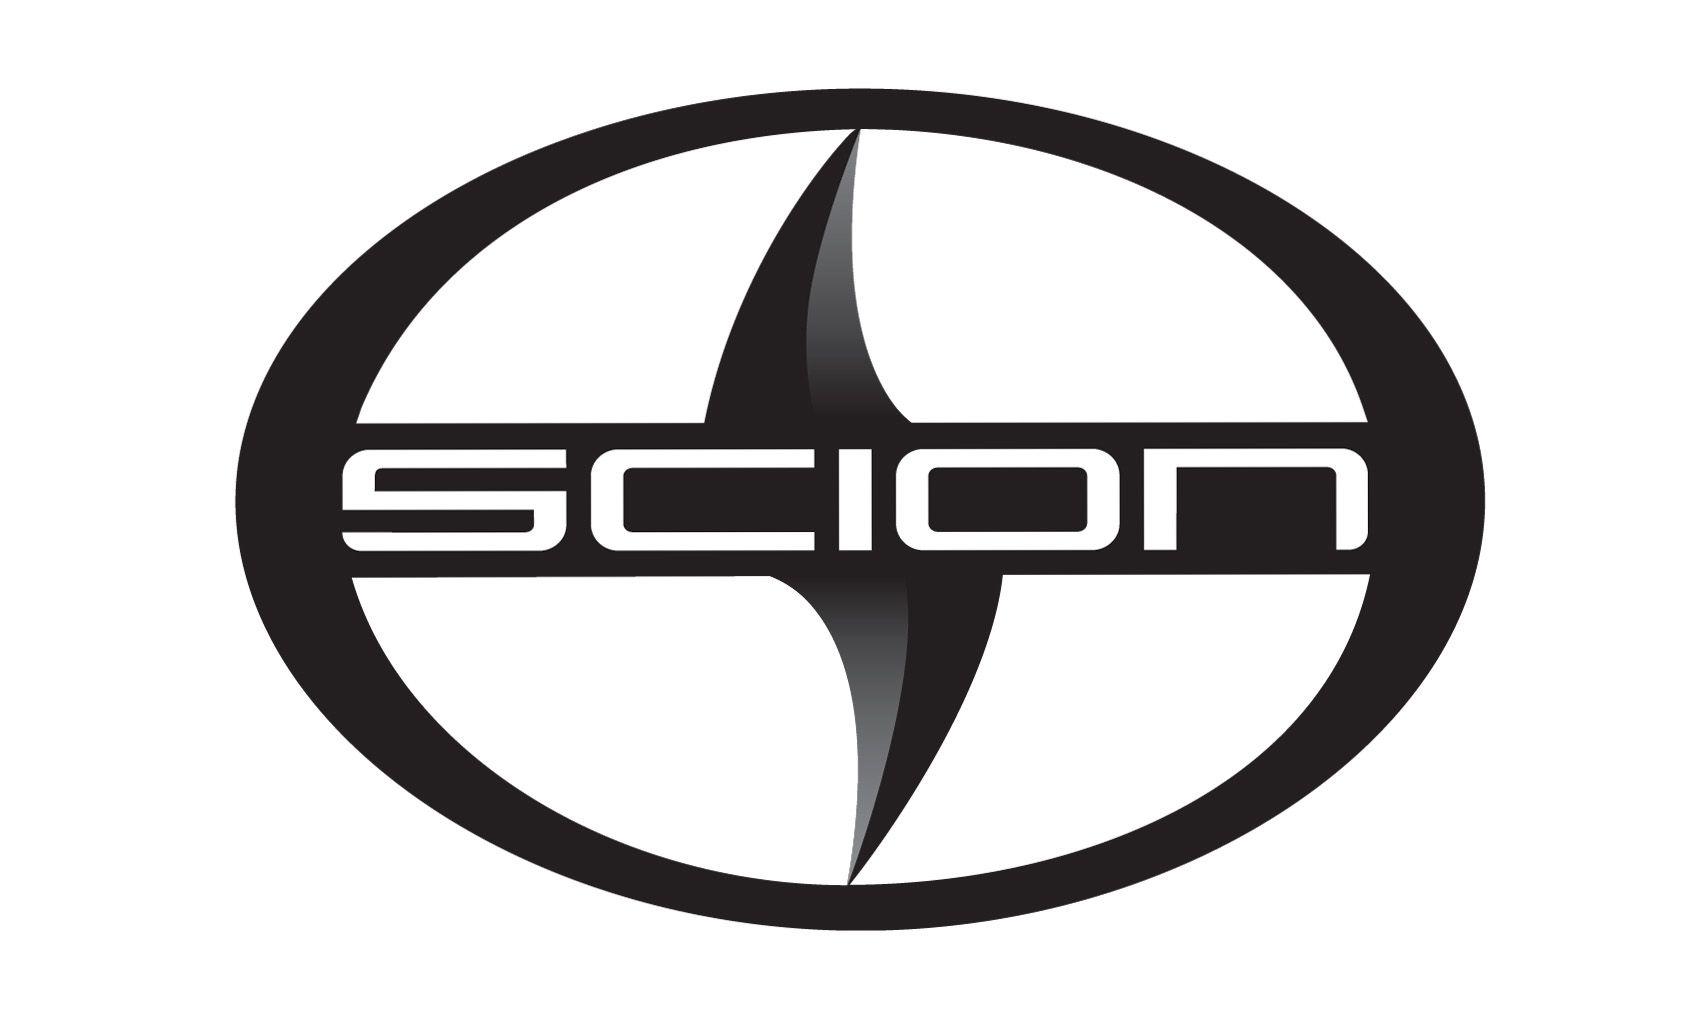 Scion Logo - Scion Logo Meaning and History, latest models | World Cars Brands